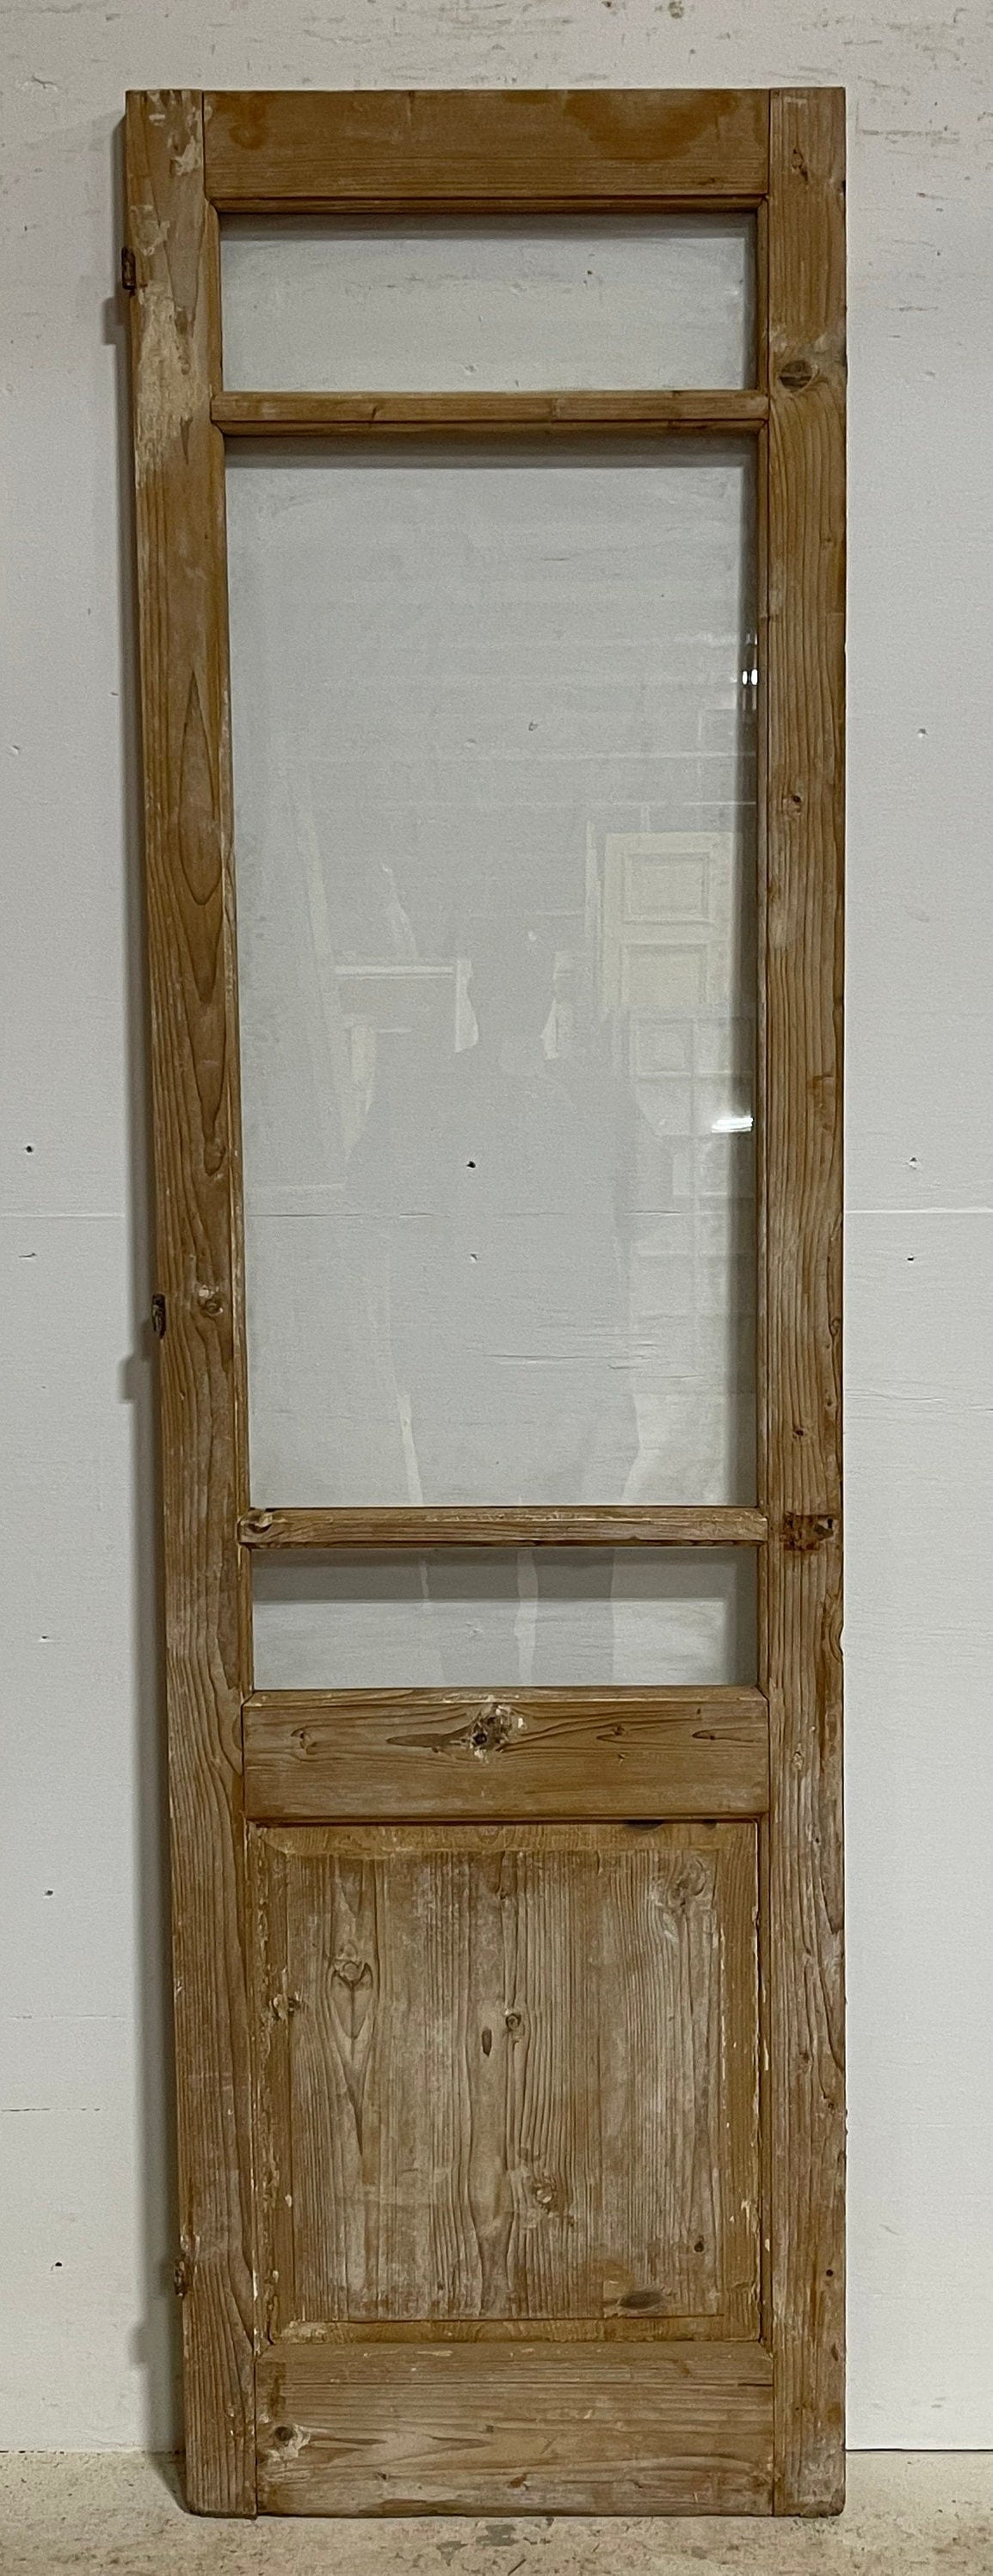 Antique French panel door with glass (88x24.25) G1252s